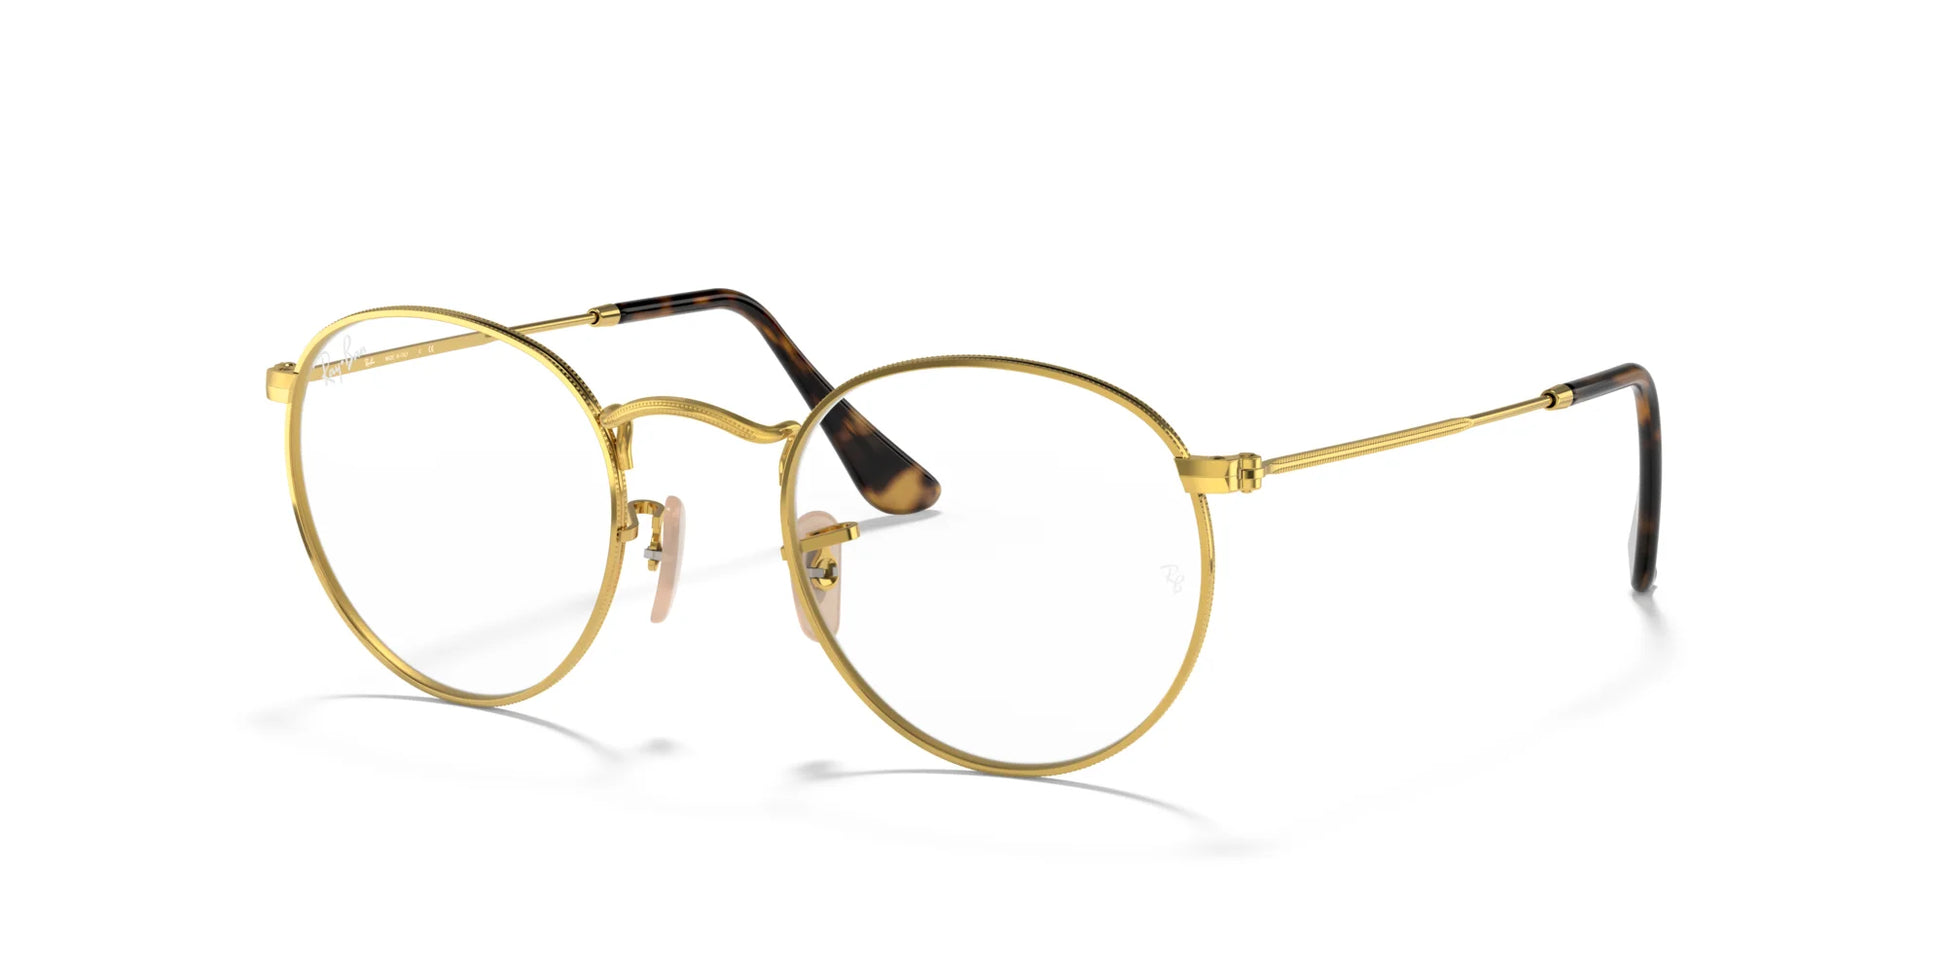 Ray-Ban ROUND METAL RX3447V Eyeglasses Gold / Clear